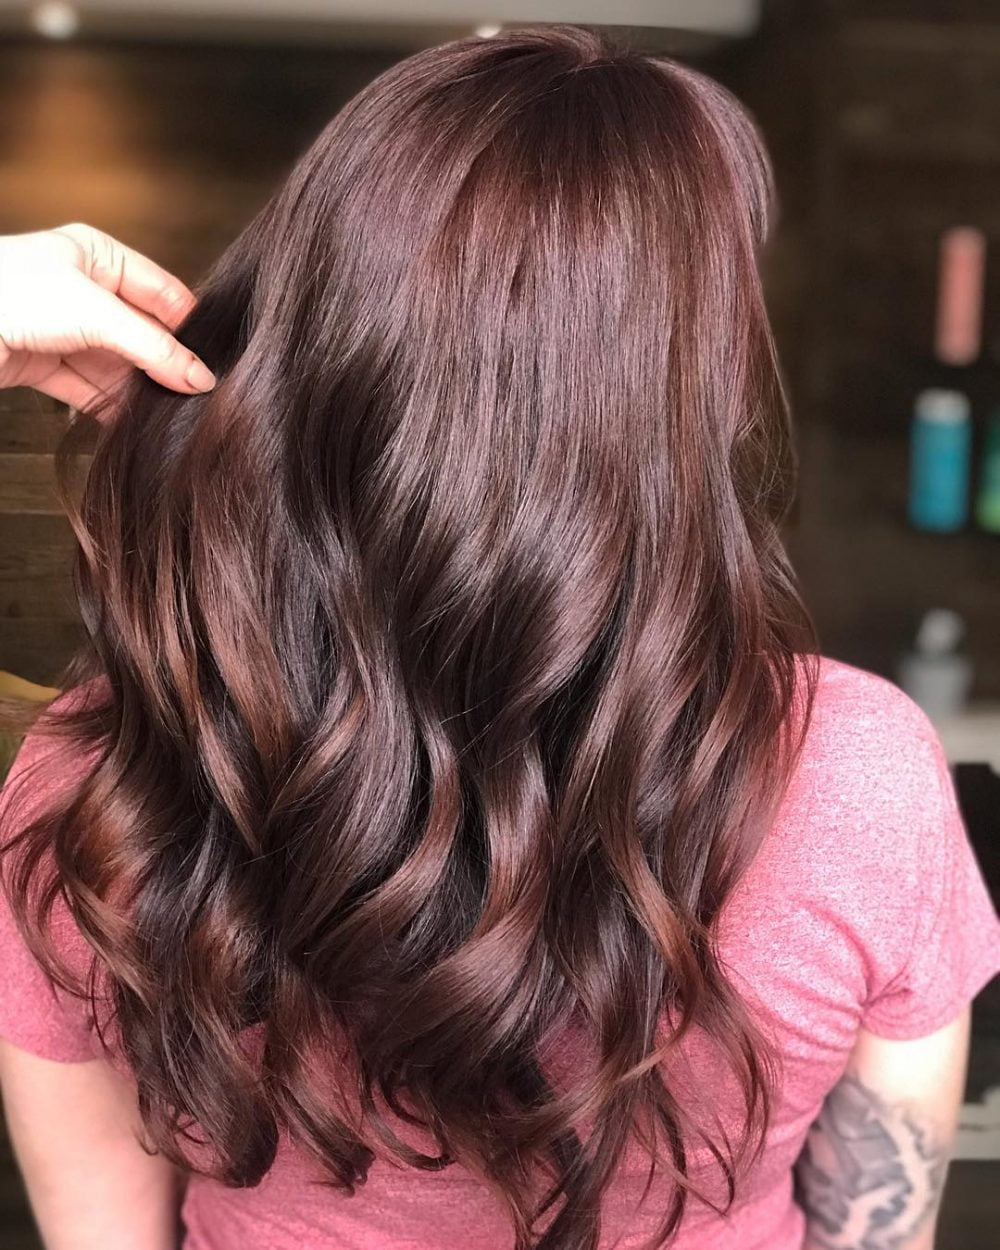 30 Best Auburn Hair Color Ideas That Are Hot This Year Hairstyles Vip 